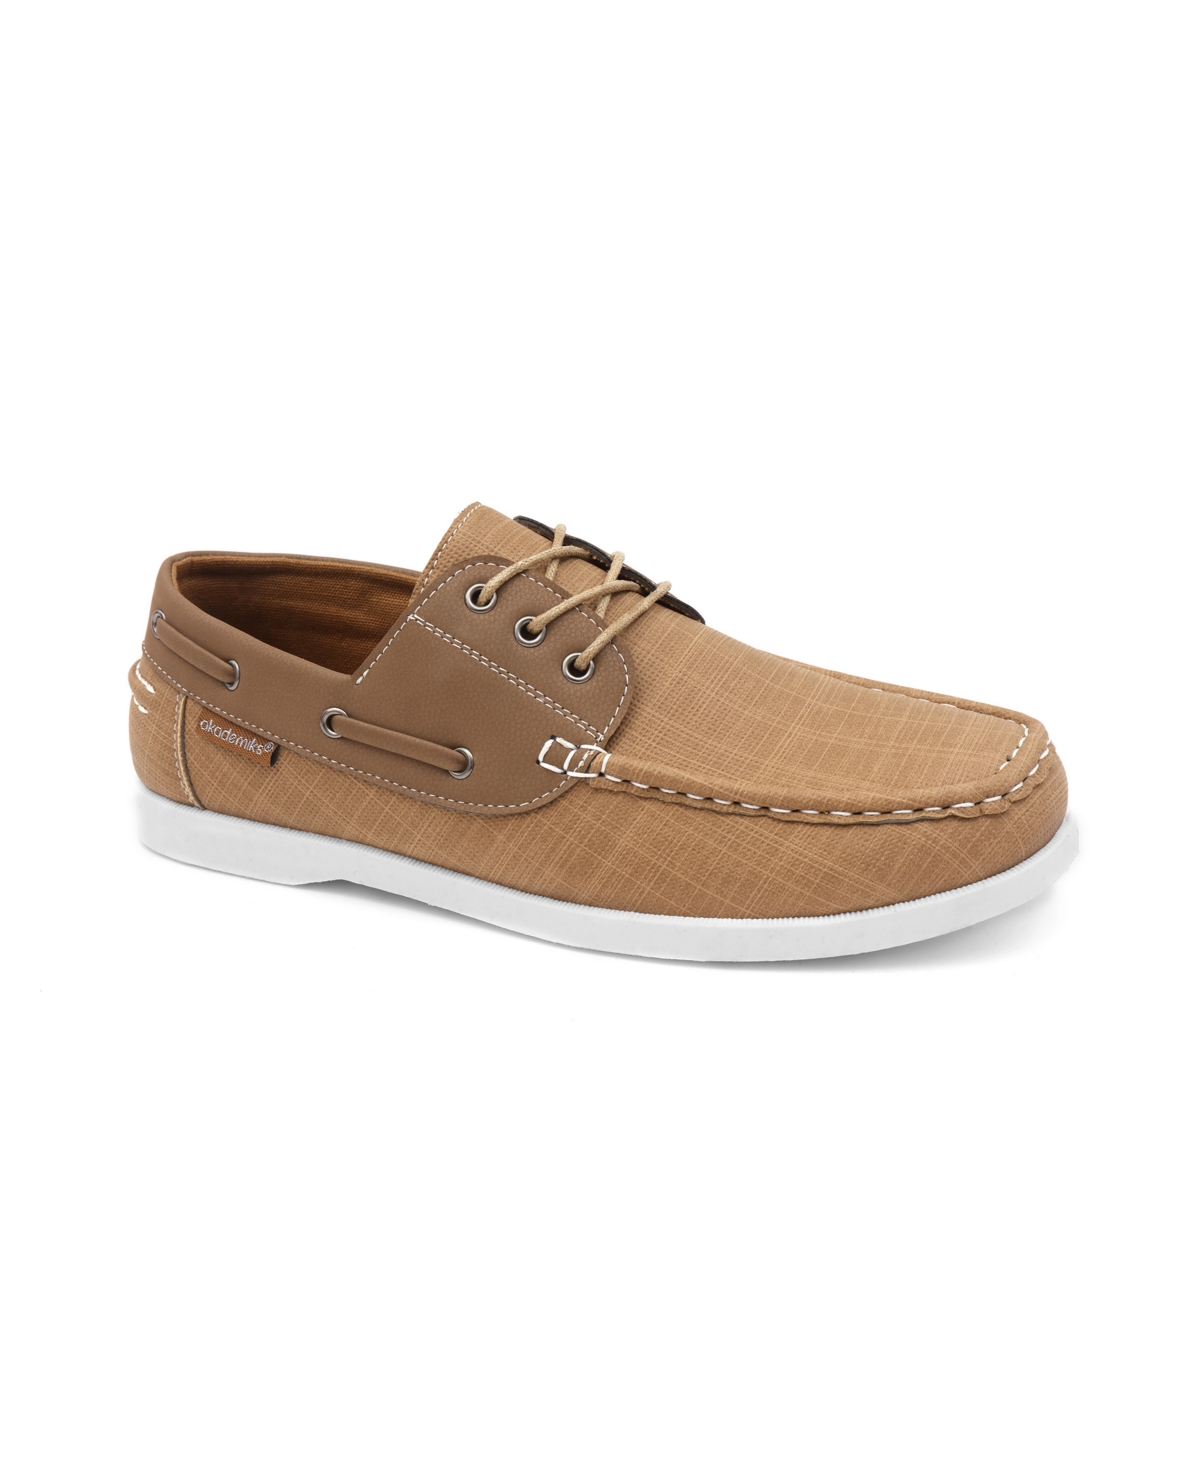 Akademiks Men's Marina 2.0 Lace-up Boat Shoes In Tan